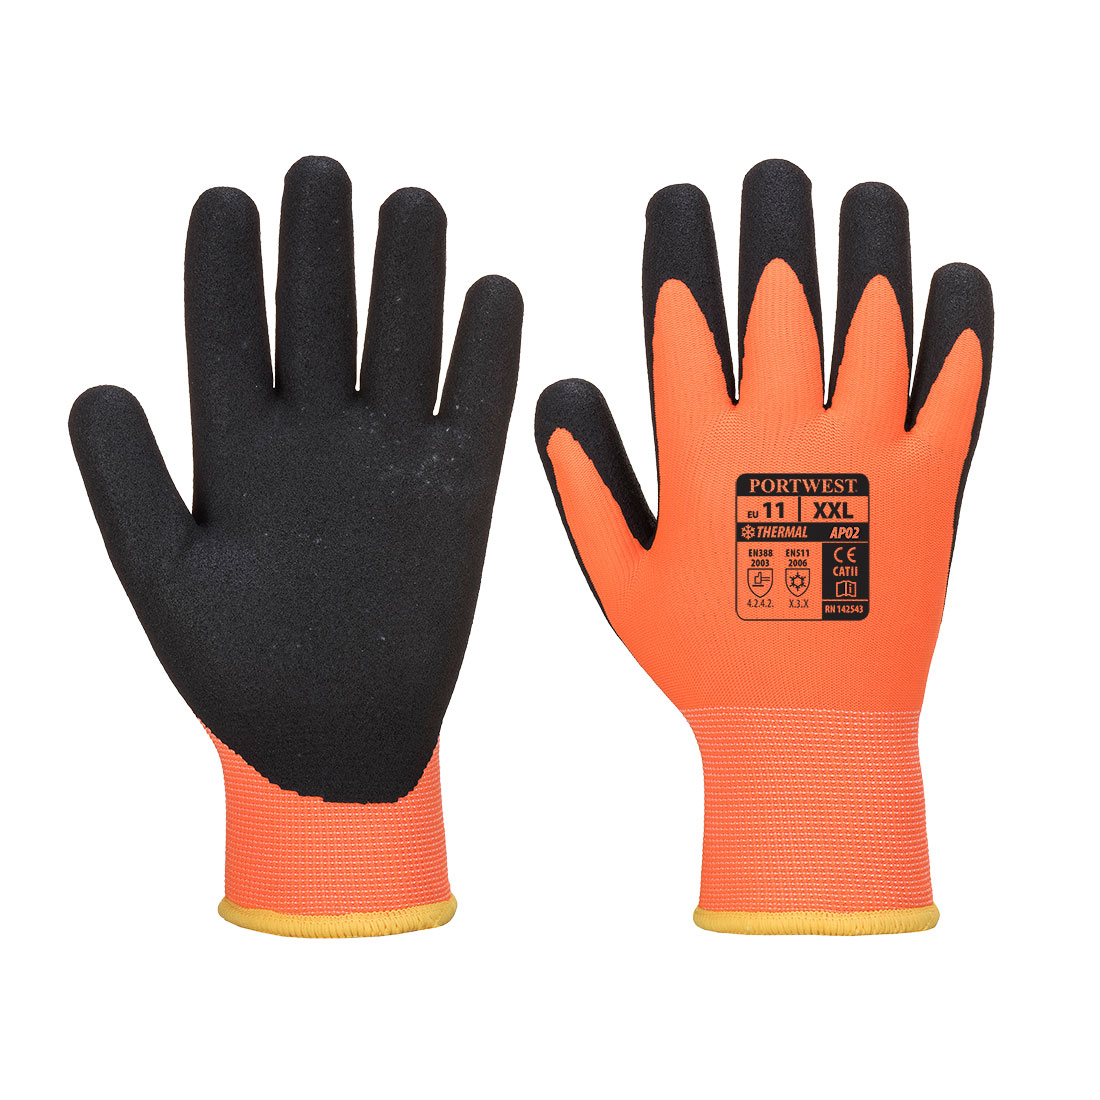 Thermo Pro Ultra Glove